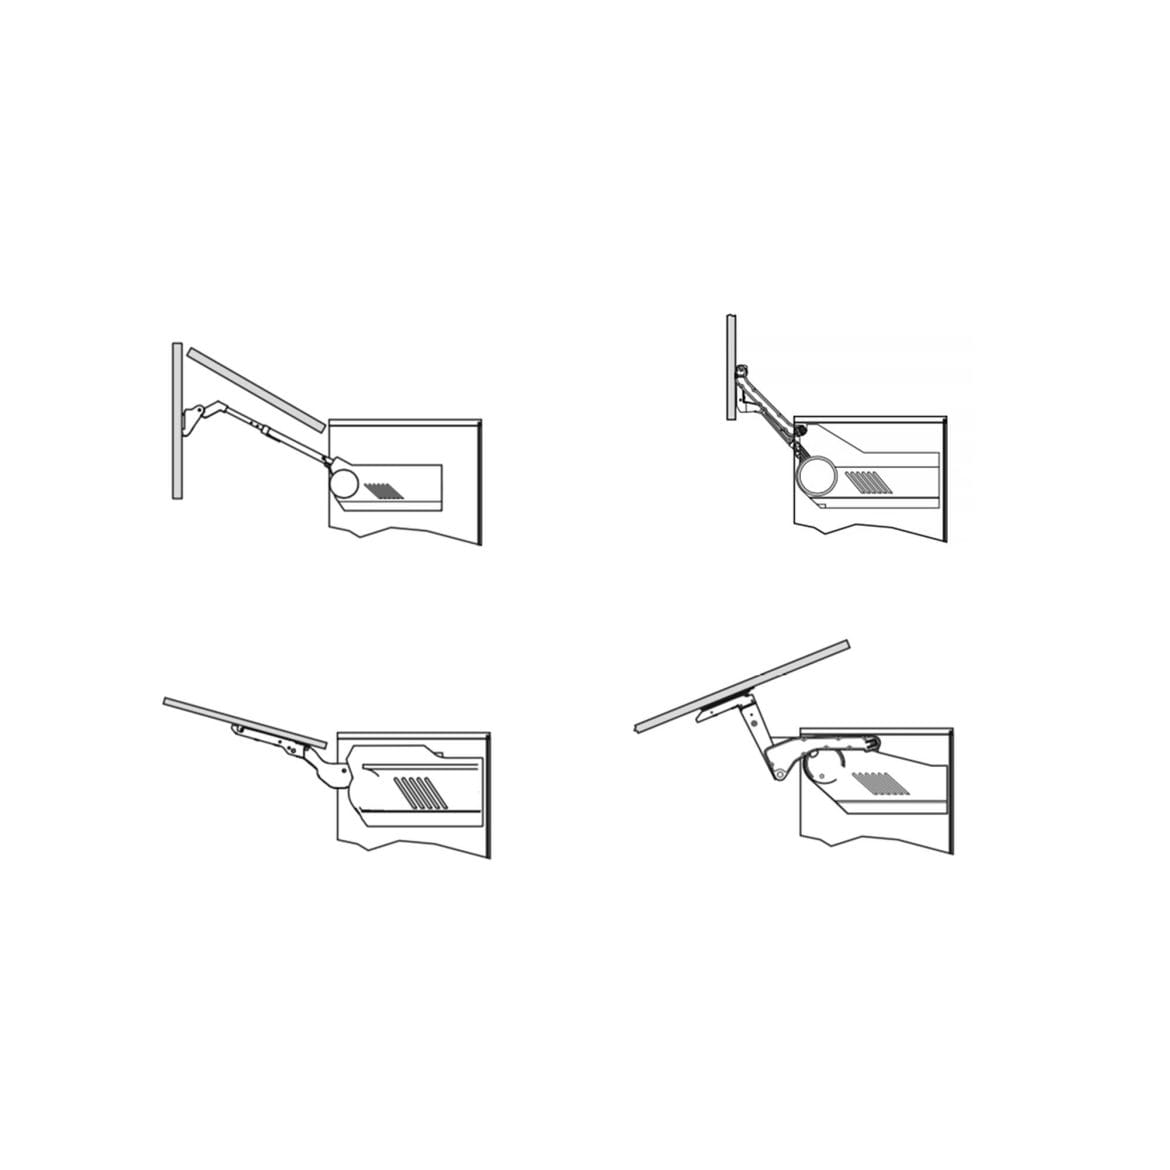 Push-catch handle and touch opening system illustration in Hubble designer kitchen